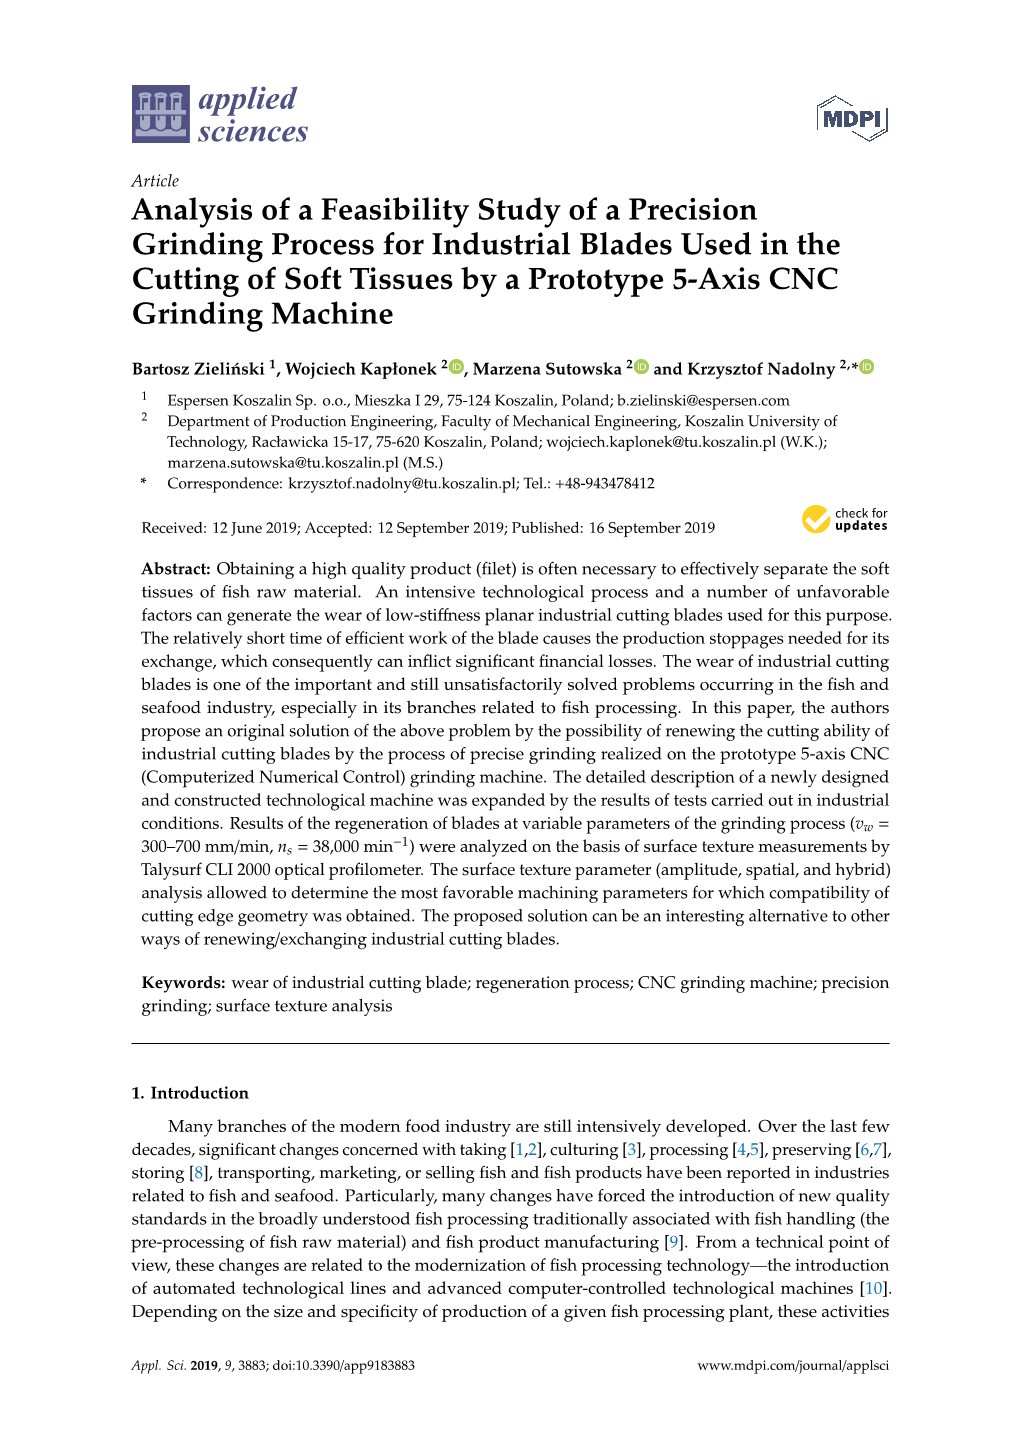 Analysis of a Feasibility Study of a Precision Grinding Process for Industrial Blades Used in the Cutting of Soft Tissues by a Prototype 5-Axis CNC Grinding Machine